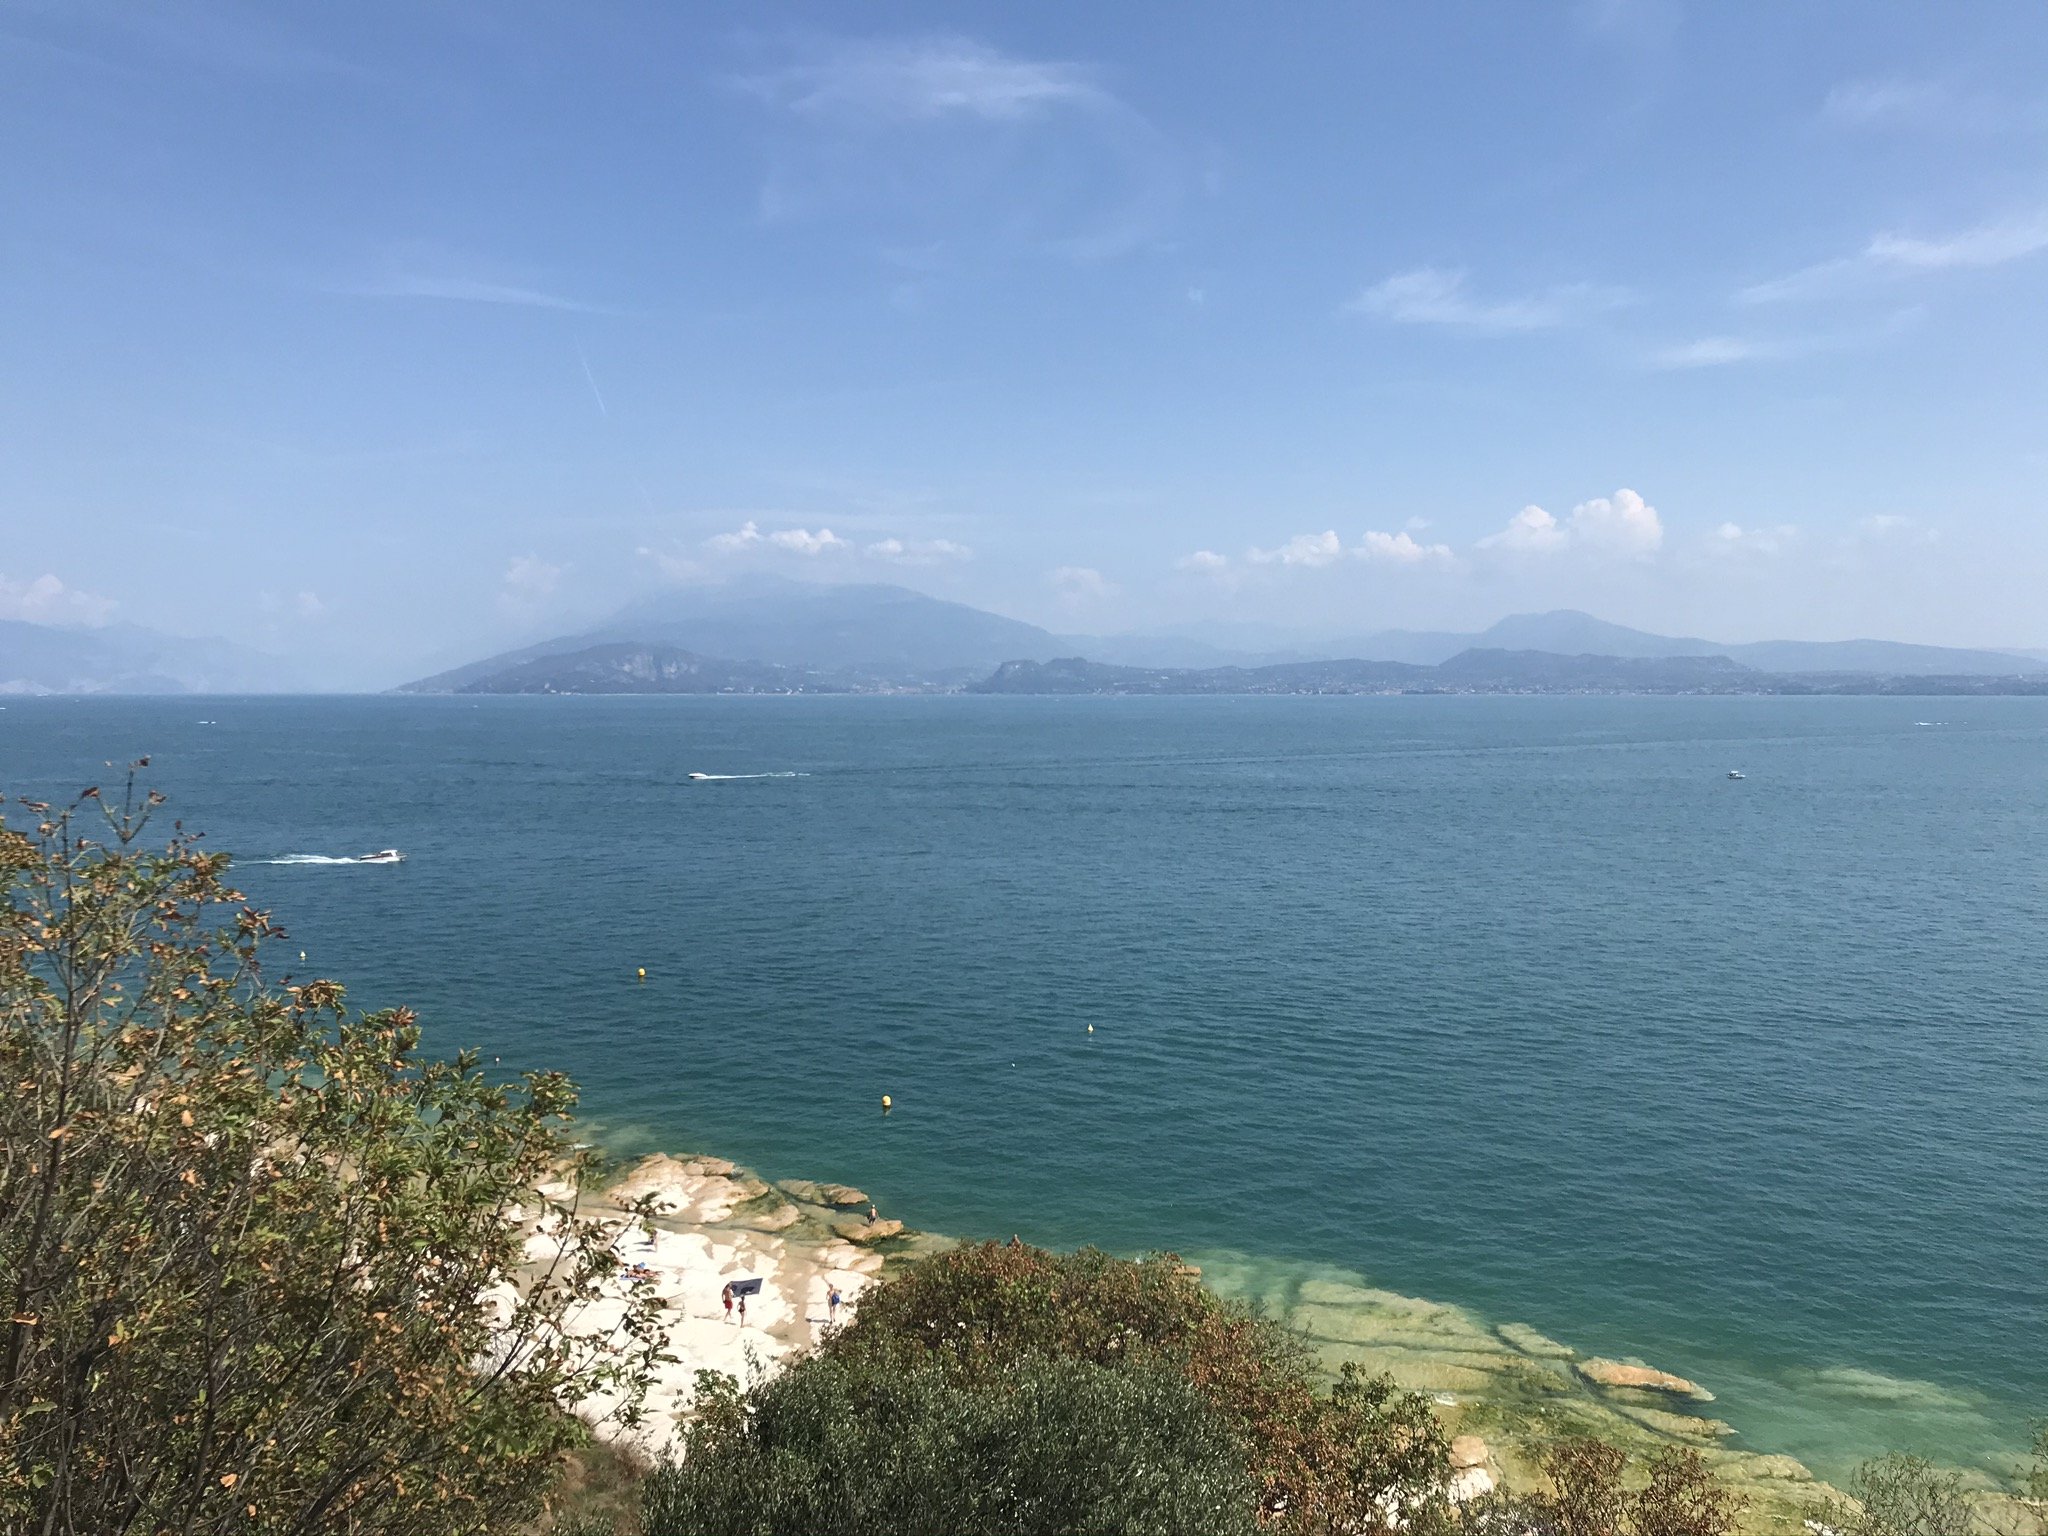  PICTURED: A hot August day on Garda, seen from the Roman Villa Catula, Lake Garda. PC: Andrew Corbley © 